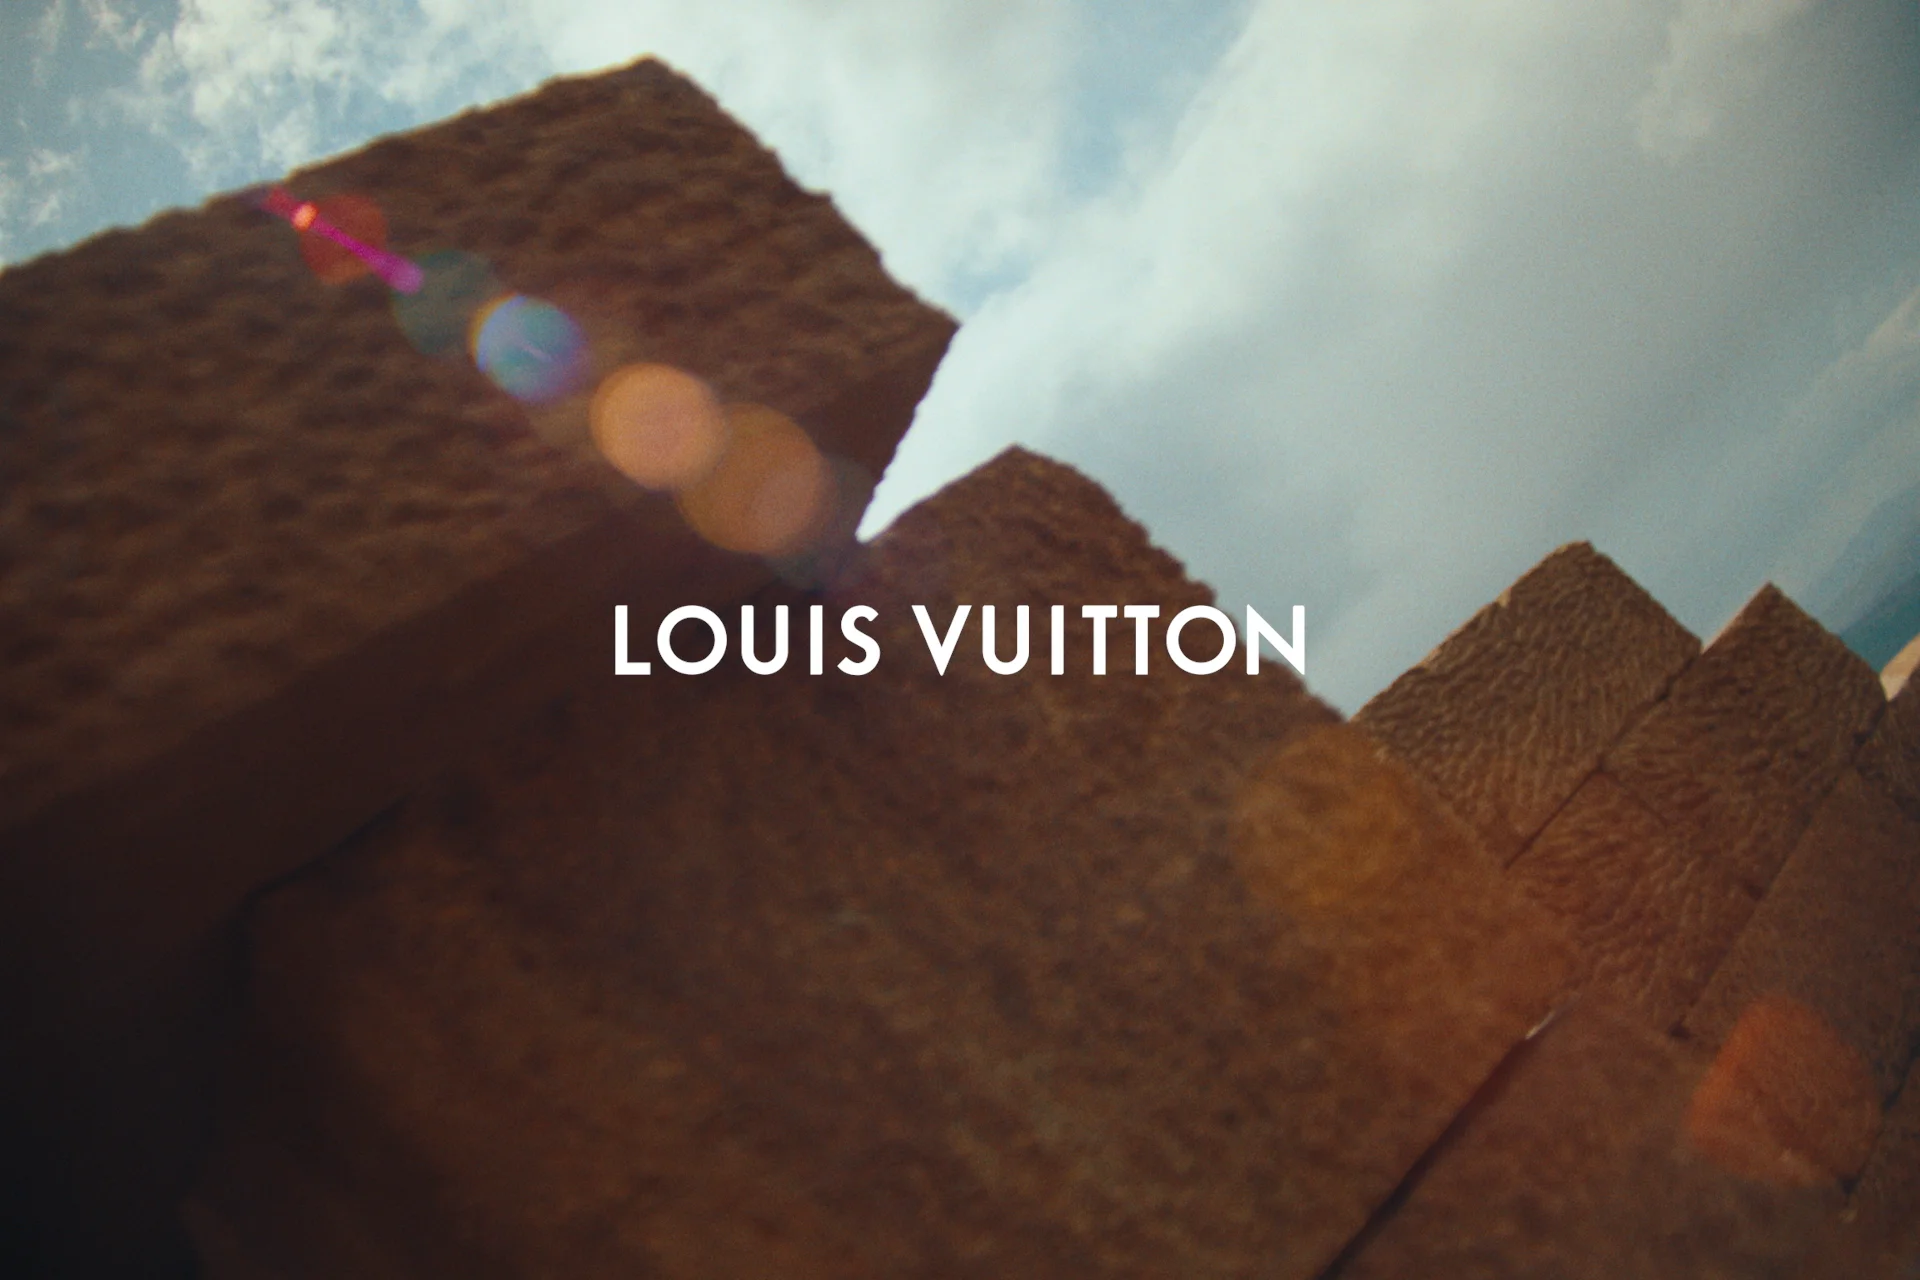 New pic from Louis Vuitton Series 5 campaign